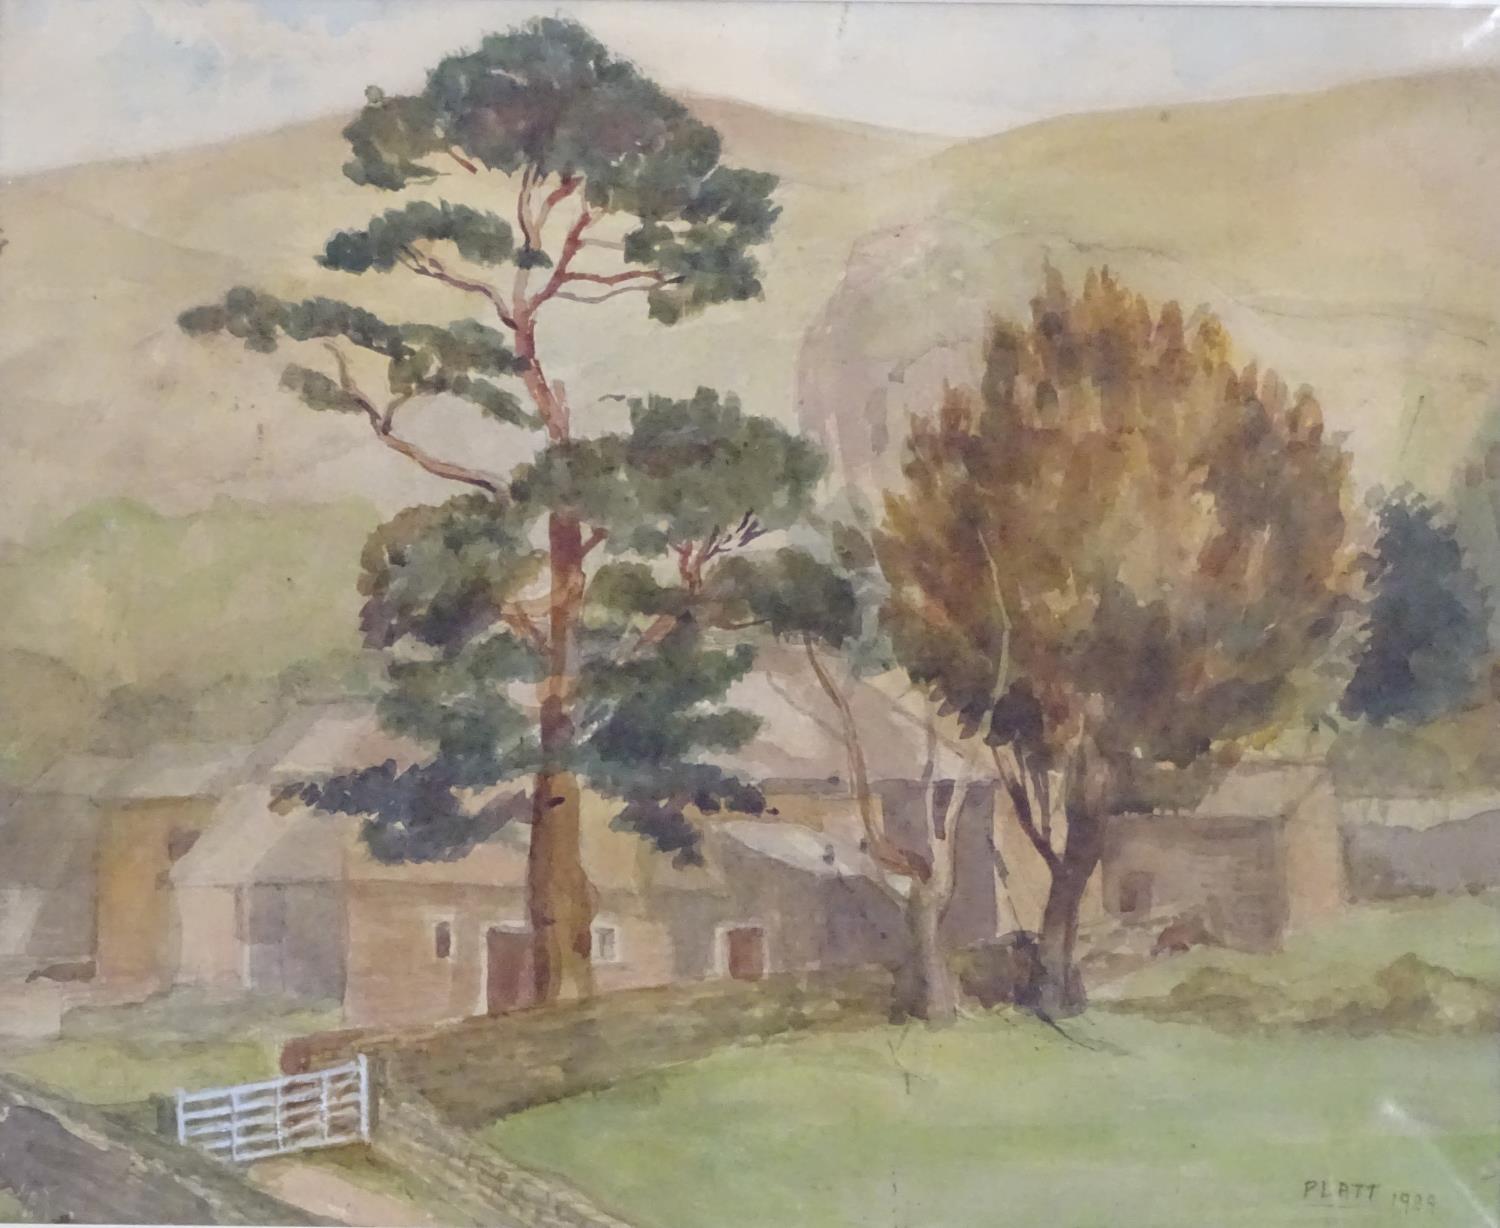 Joyce Platt, XX, Watercolour, Study for Creswick, A farmstead in a landscape with hills beyond. - Image 3 of 6